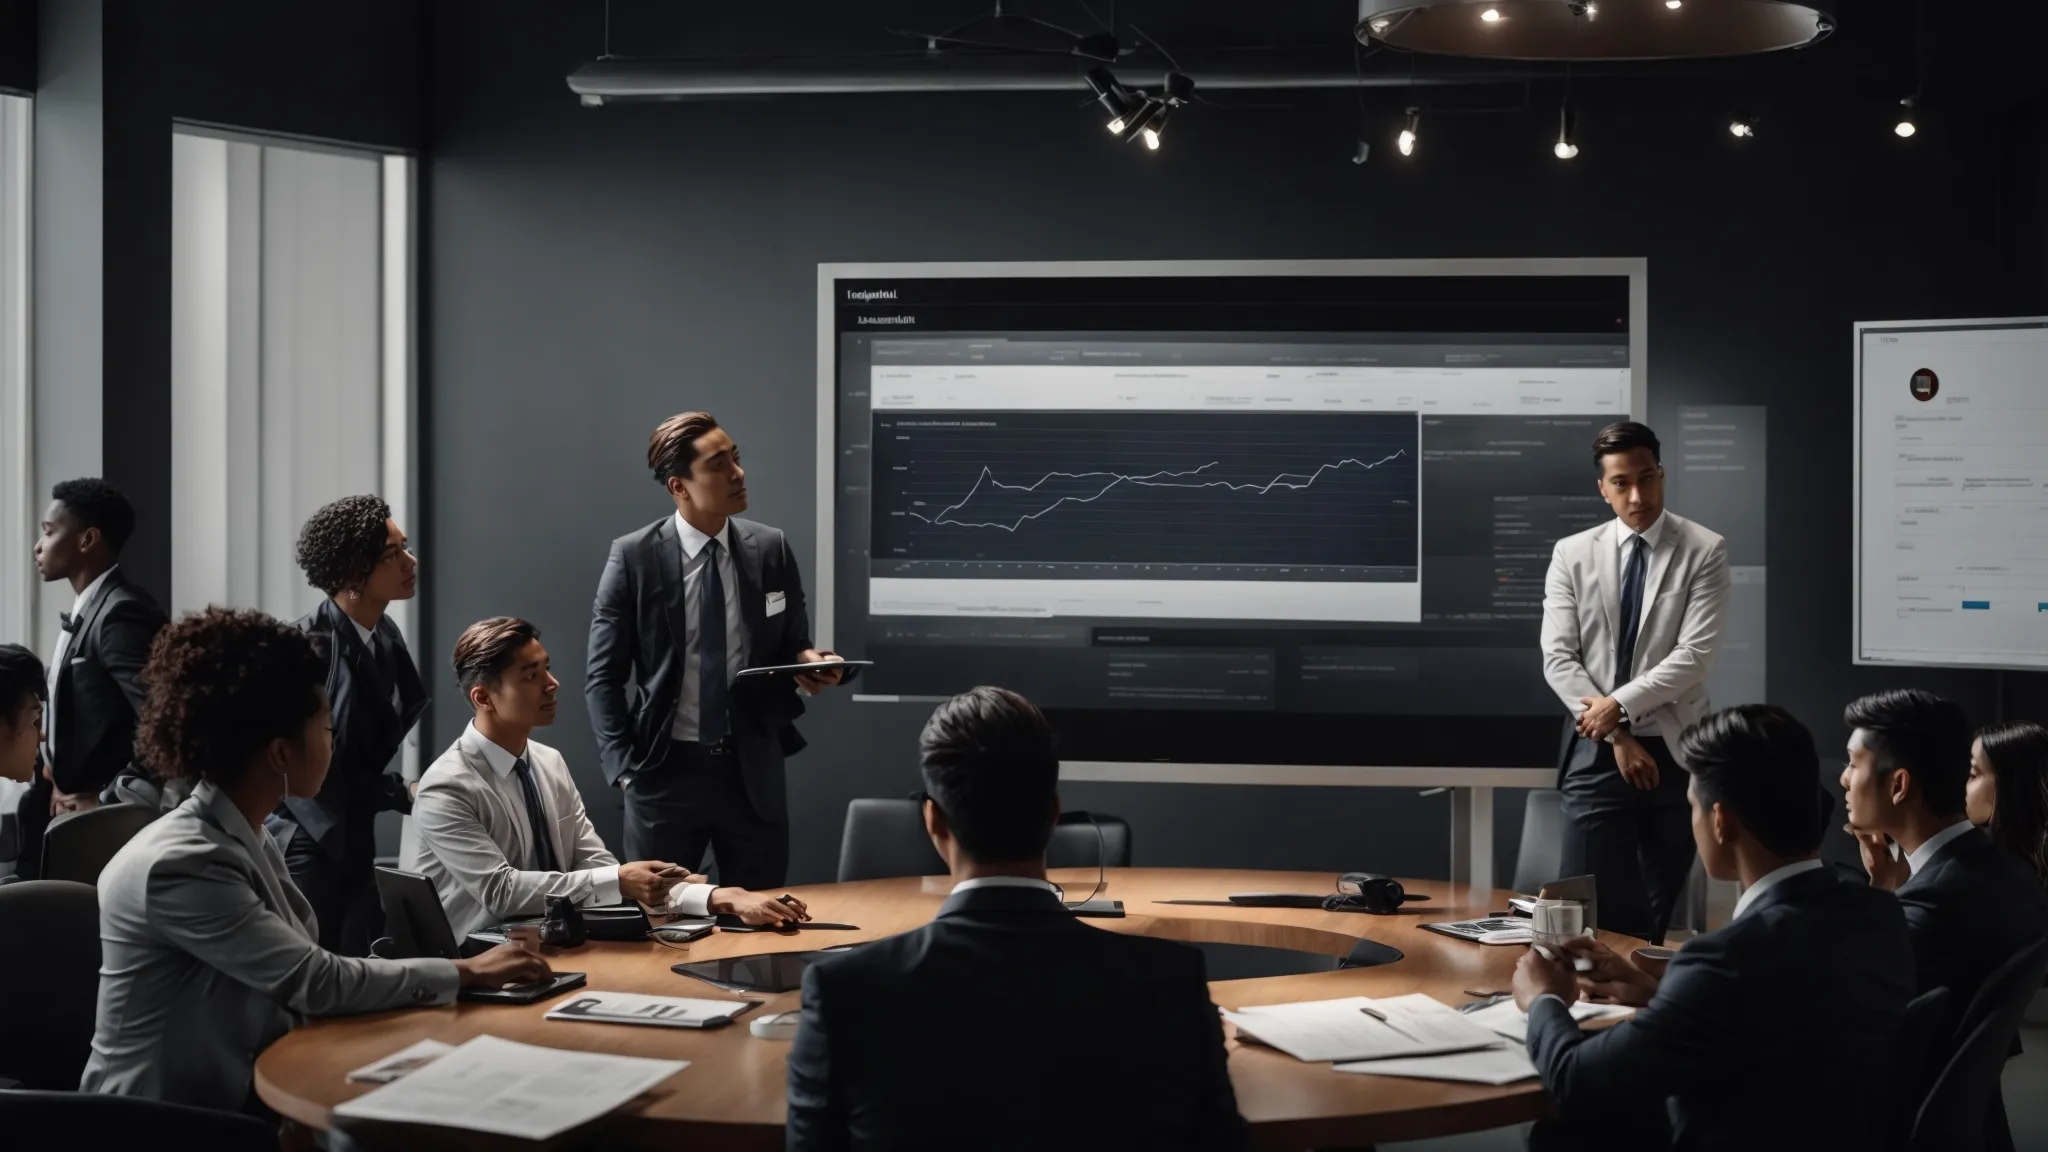 a marketing team analyzes a dynamic dashboard on a large screen, adjusting elements to align with the feedback provided by a diverse group of clients seated around the conference table.